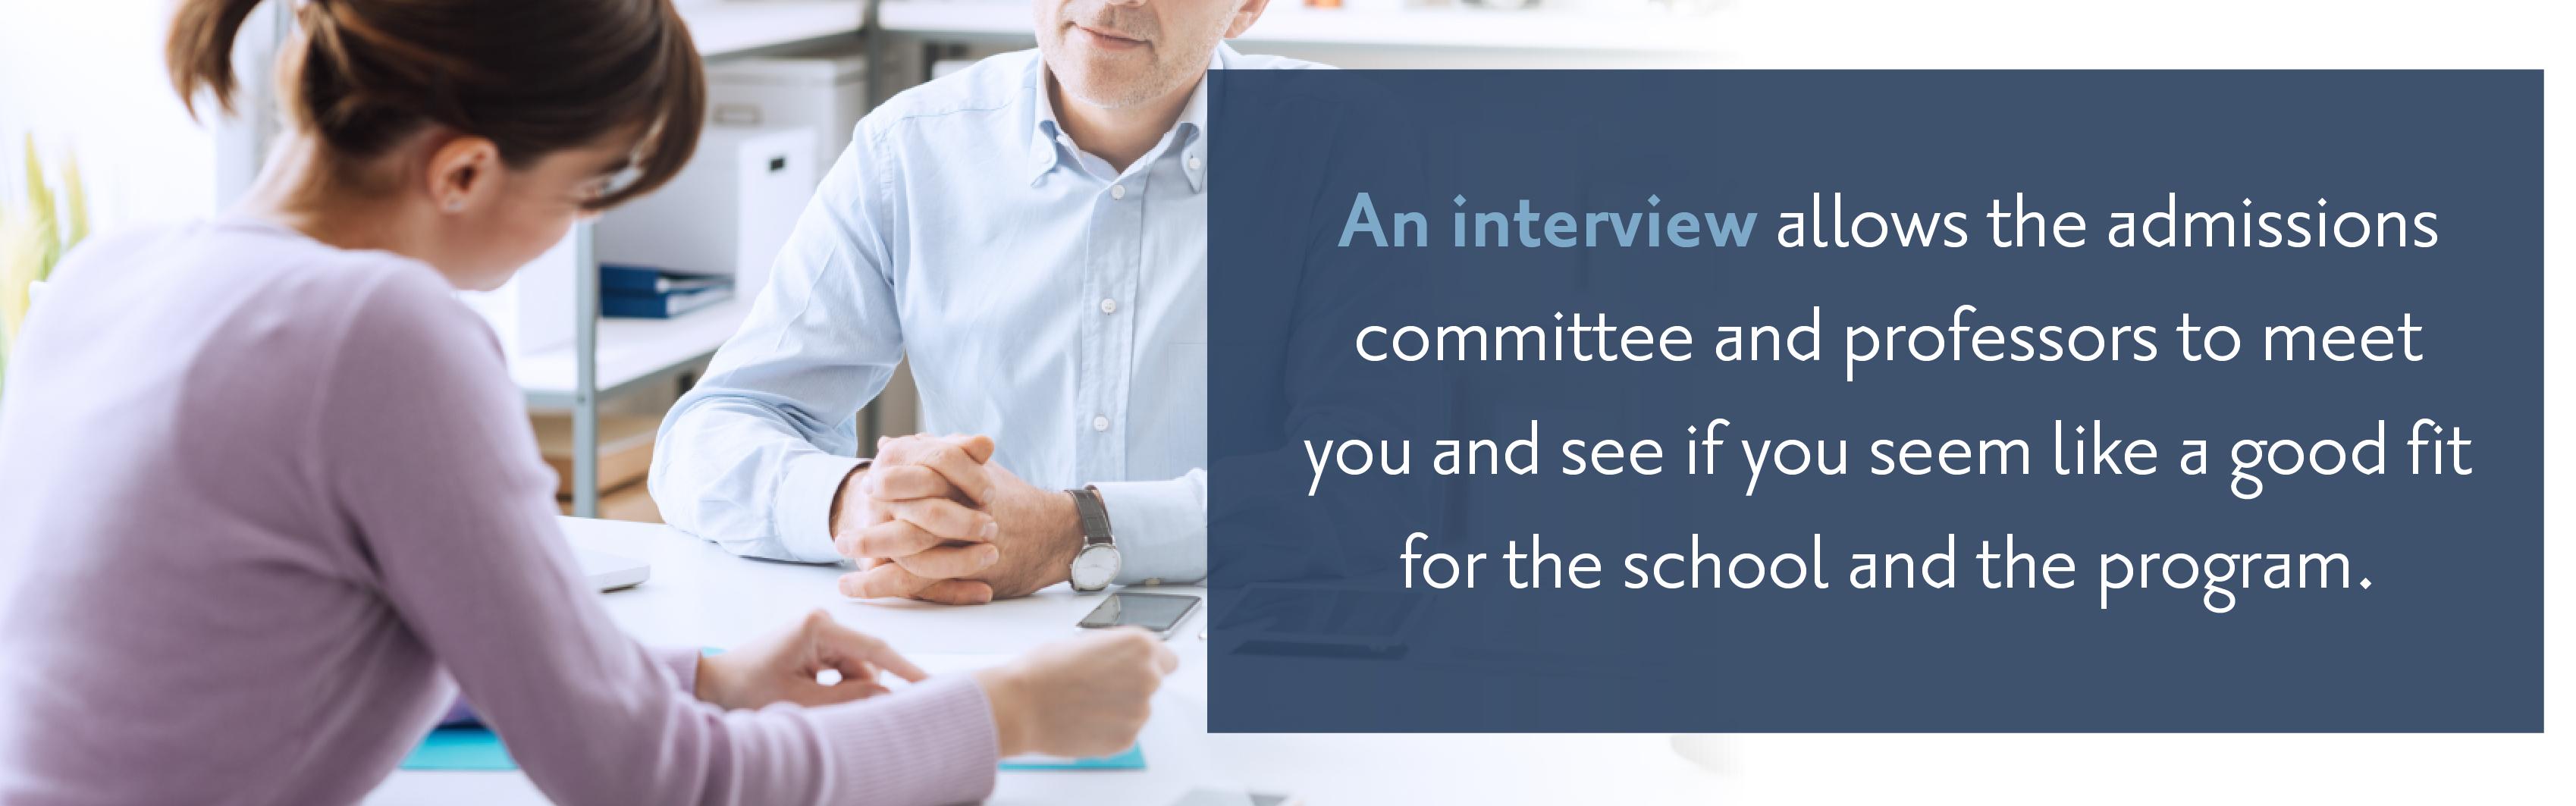 An interview allows the admissions committee and professors to meet you and see if you seem like a good fit for the school and the program